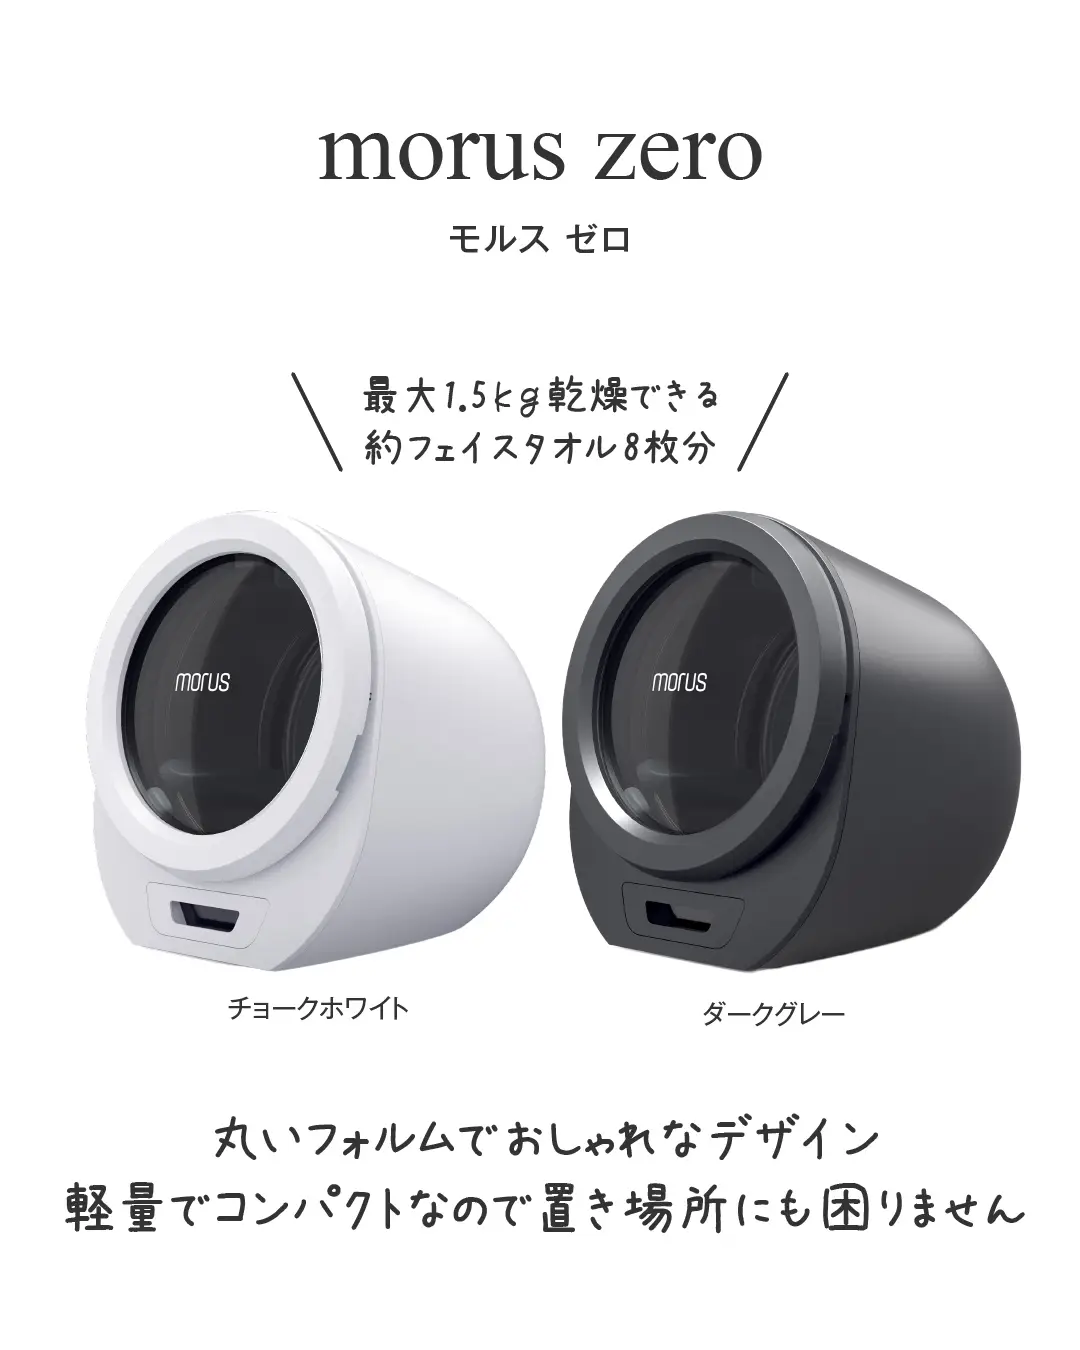 God Appliances 】 I can't let go anymore! Morus' ultra-small